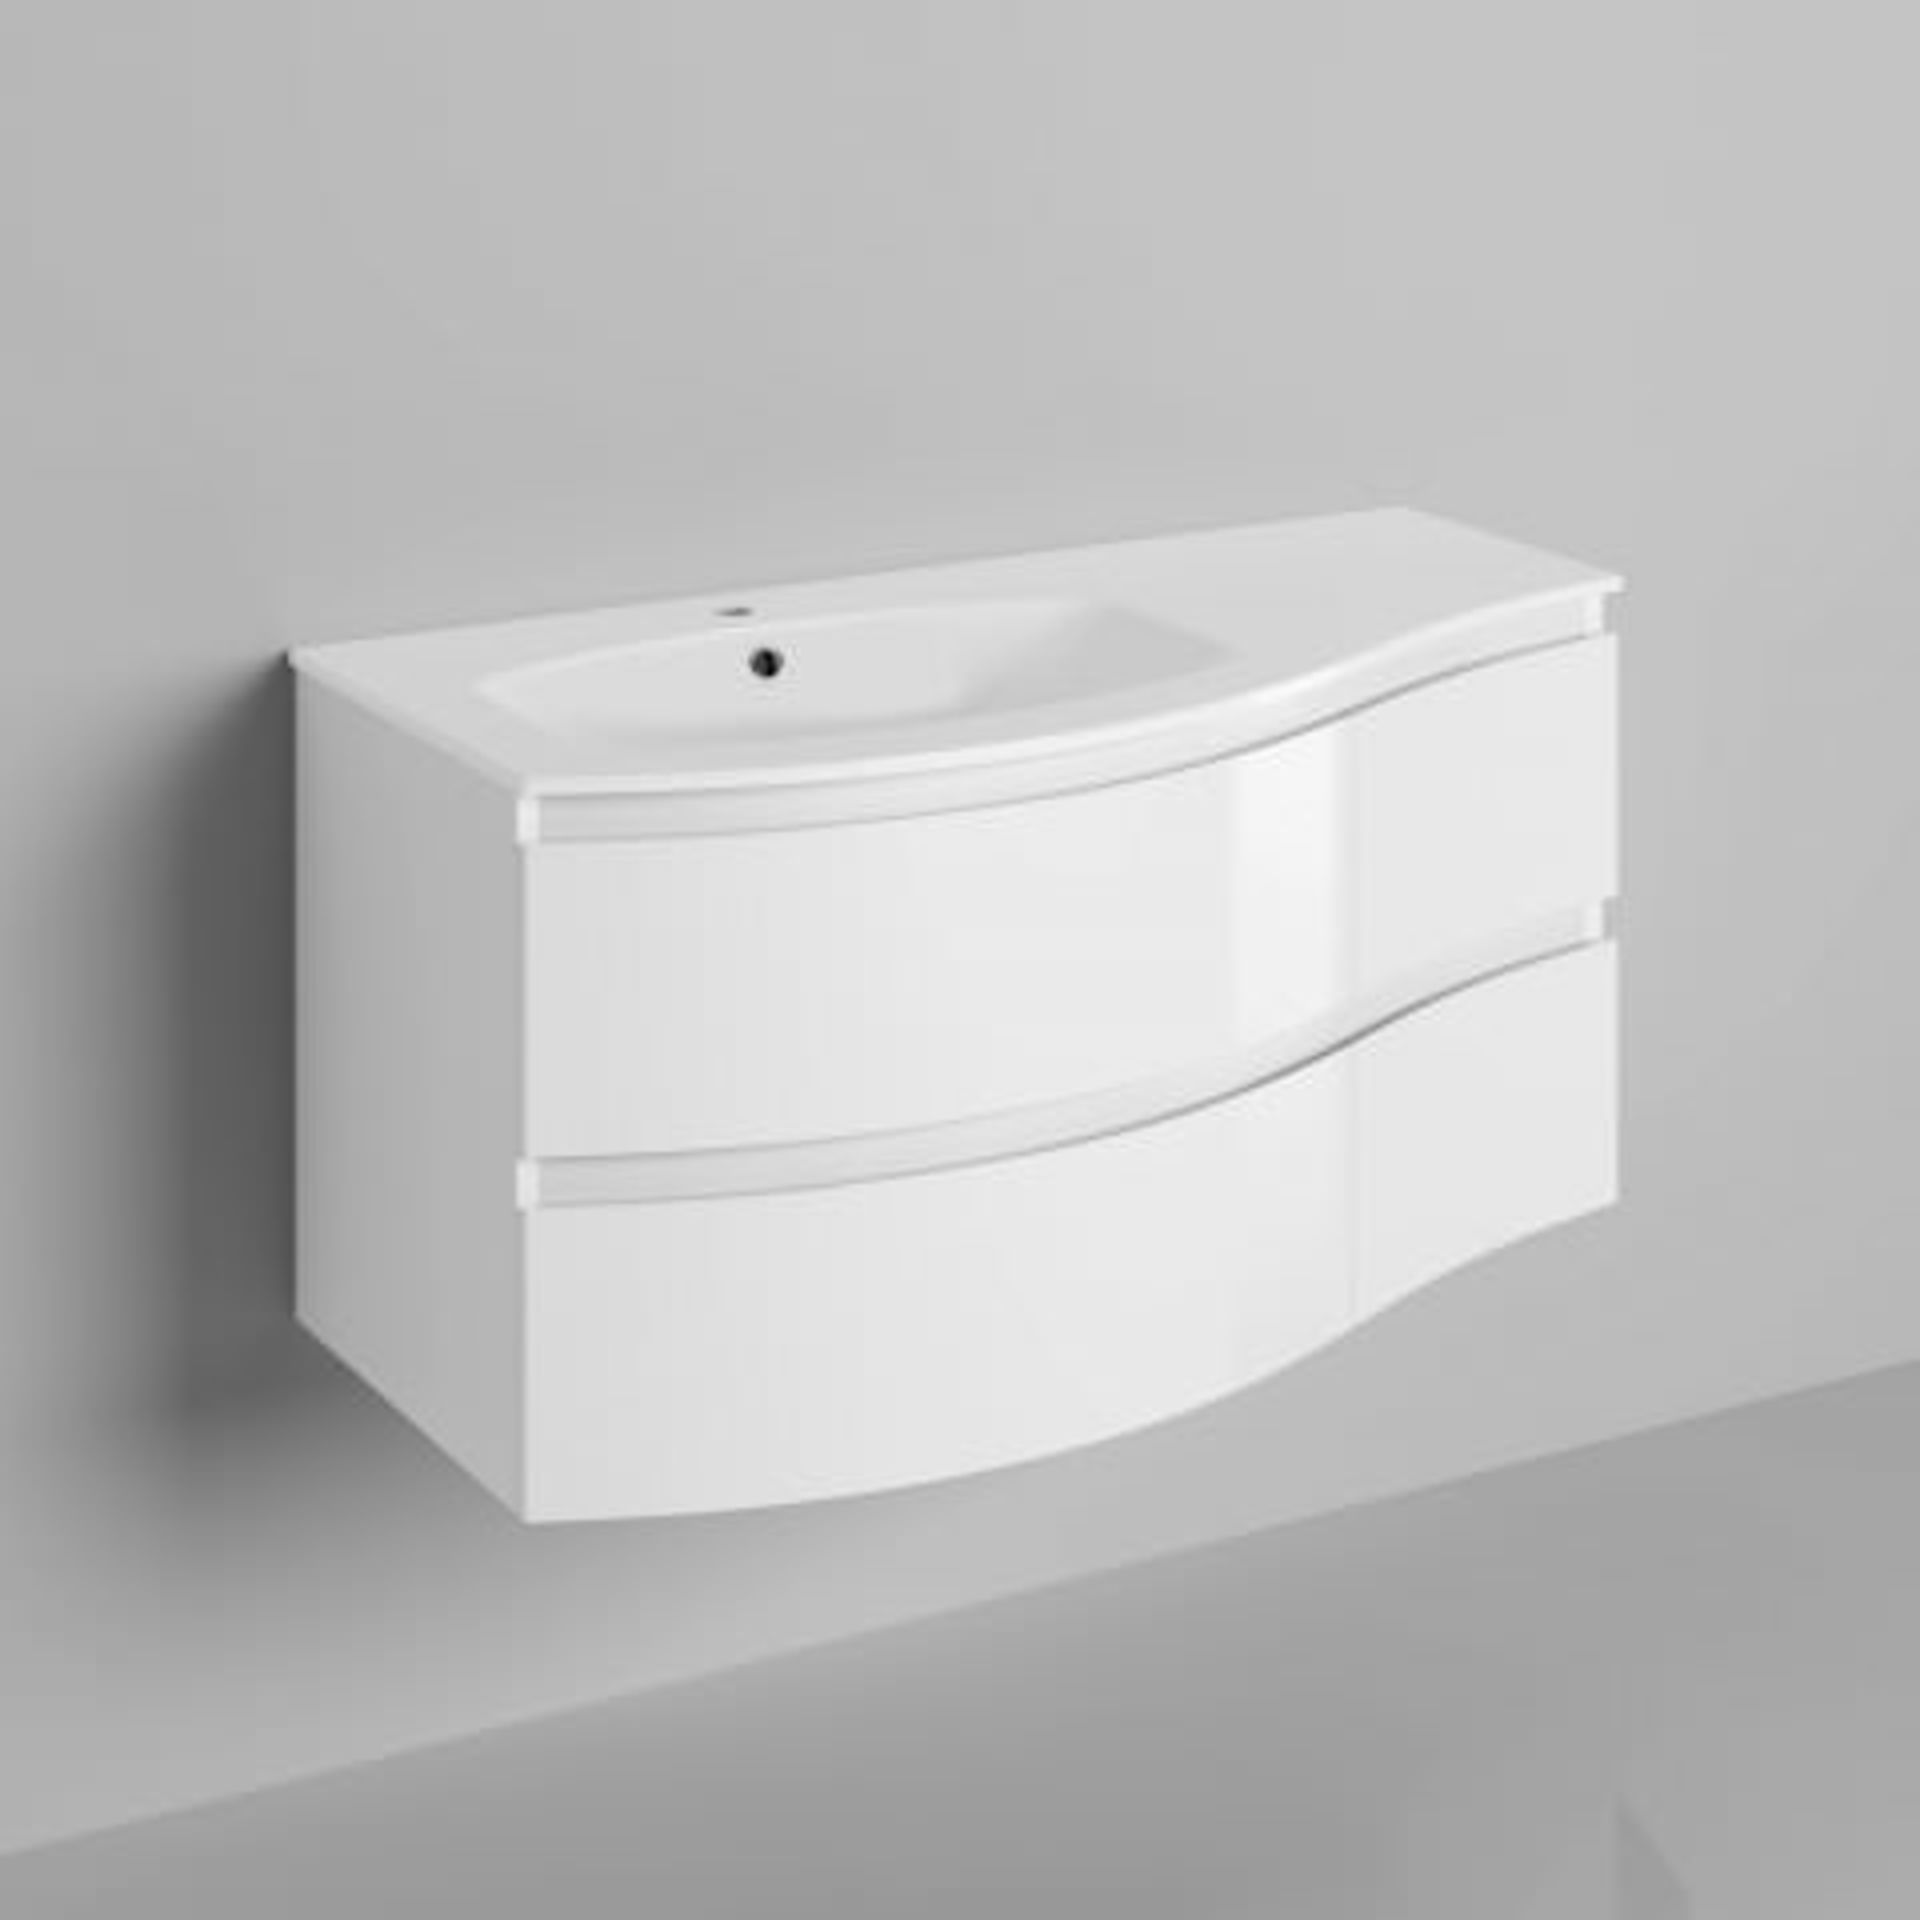 (QQ2) 1040mm Amelie High Gloss White Curved Vanity Unit - Left Hand - Wall Hung. RRP £1,199. C... - Image 5 of 6